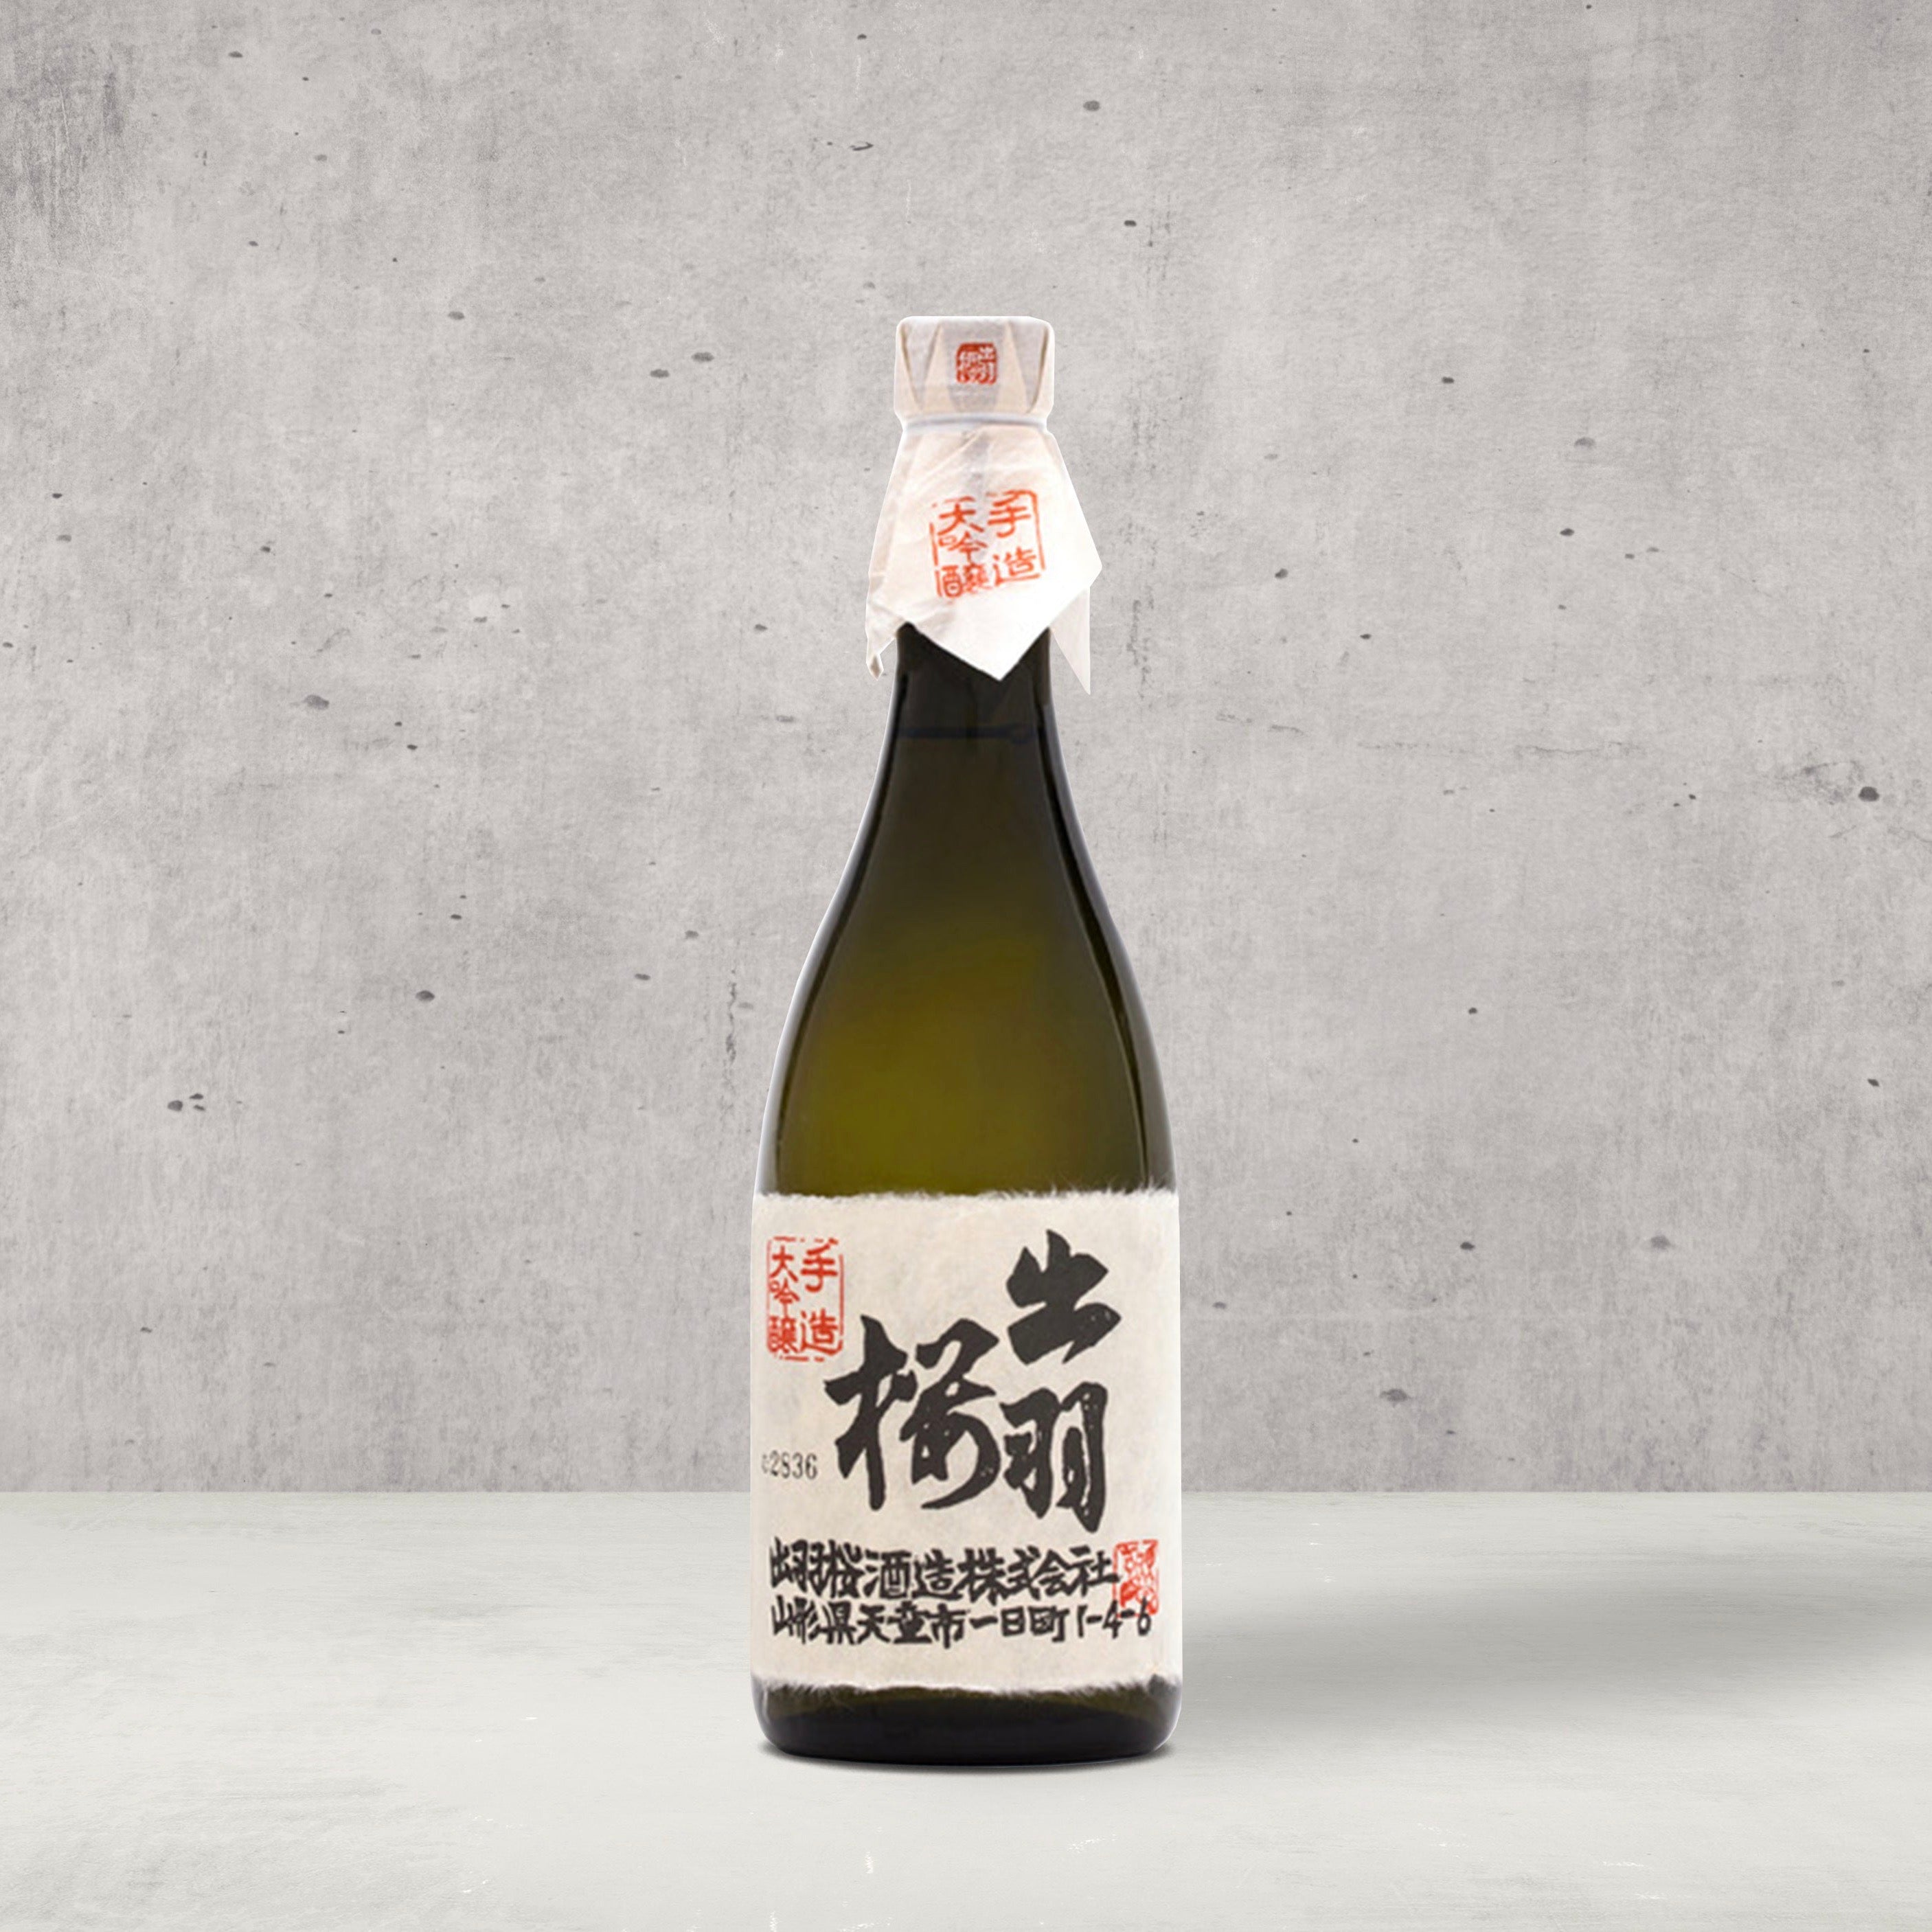 Dewazakura Daiginjo - For once, you can read a book by its cover: when this sake first came out to the market in 1976 in a bottle with a tesuki washi (a delicate, traditional handmade Japanese paper) label with its name in bold Japanese calligraphy, it was the first bottle to ever use washi on its bottle. Shop Japanese sake online delivered to your home.